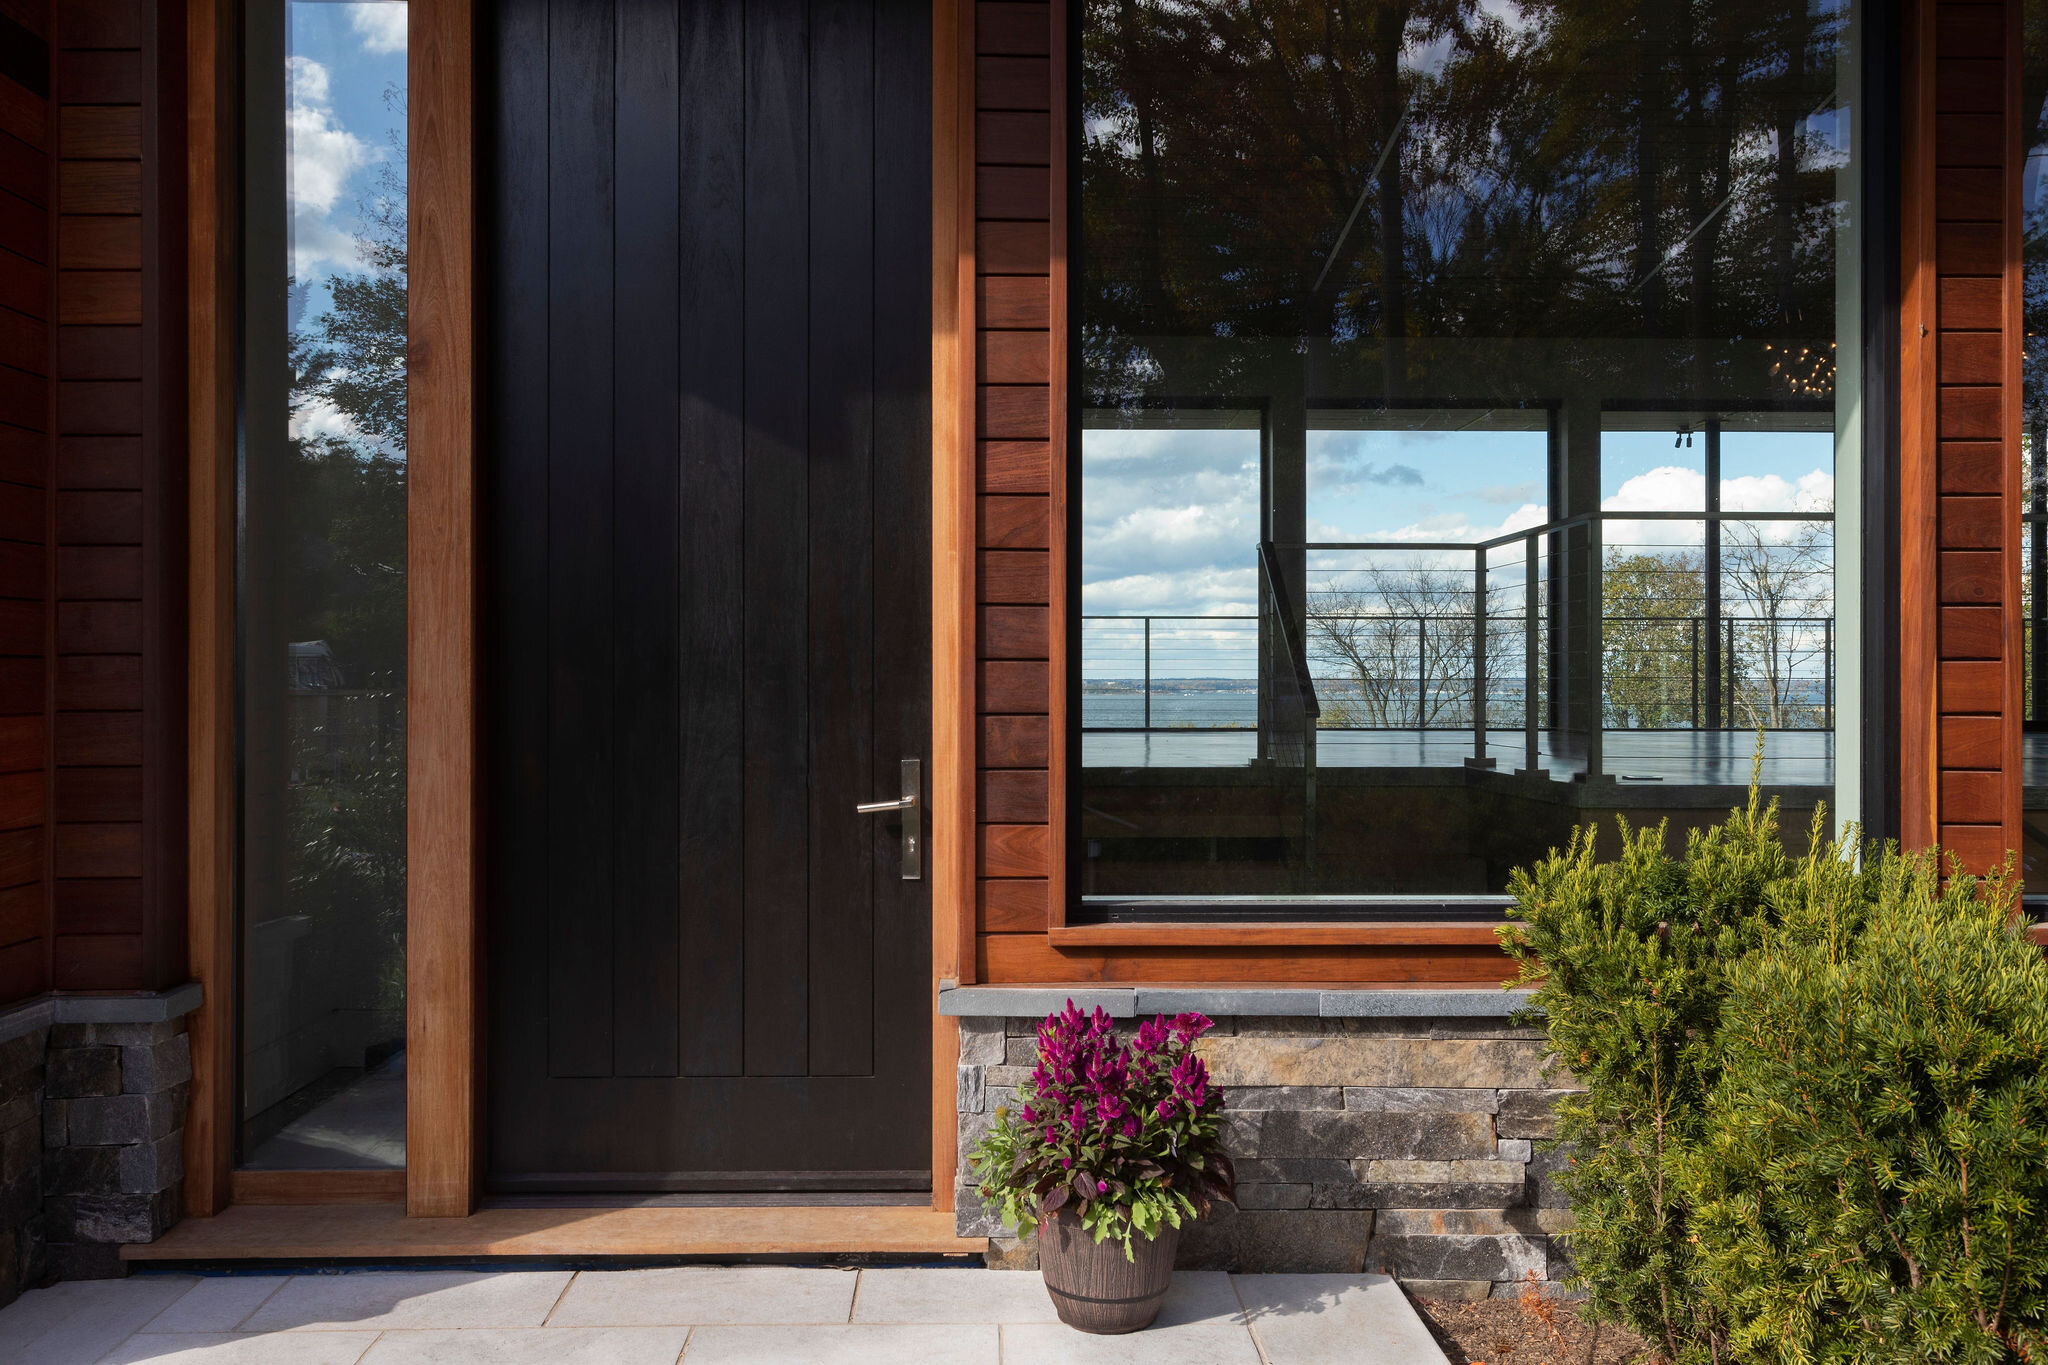  The new huge front door is stained a dark blackened brown color , giving a sense of excitement to what lays ahead… 